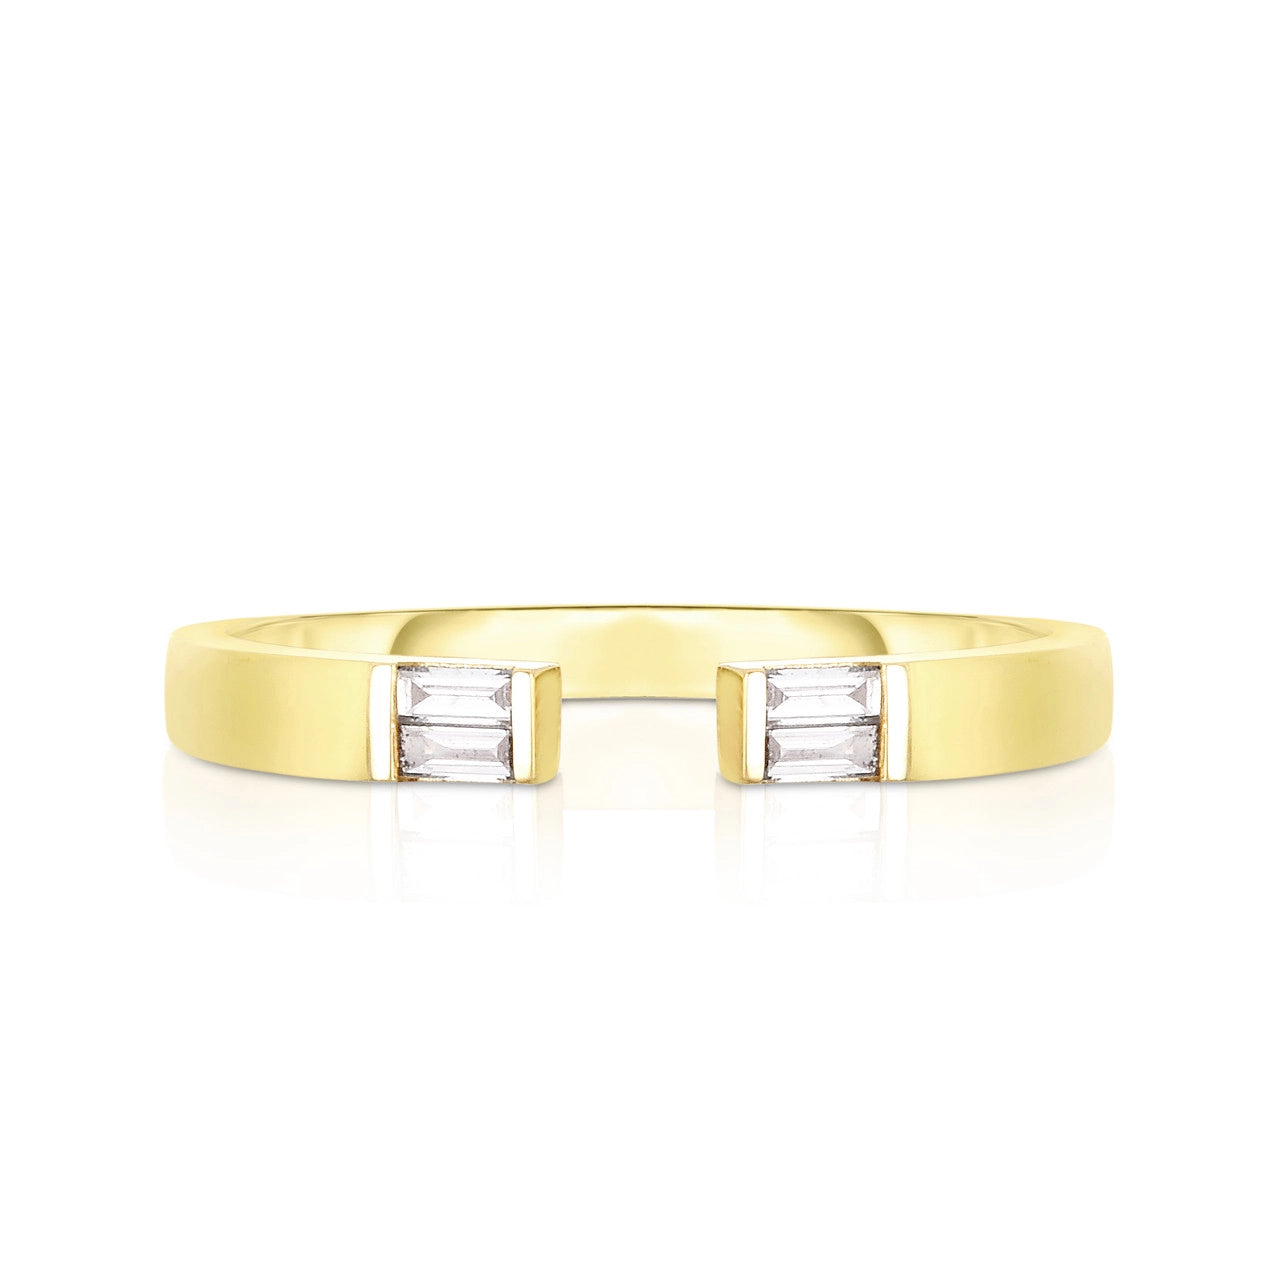 Open Baguette Diamond Ring in Yellow Gold